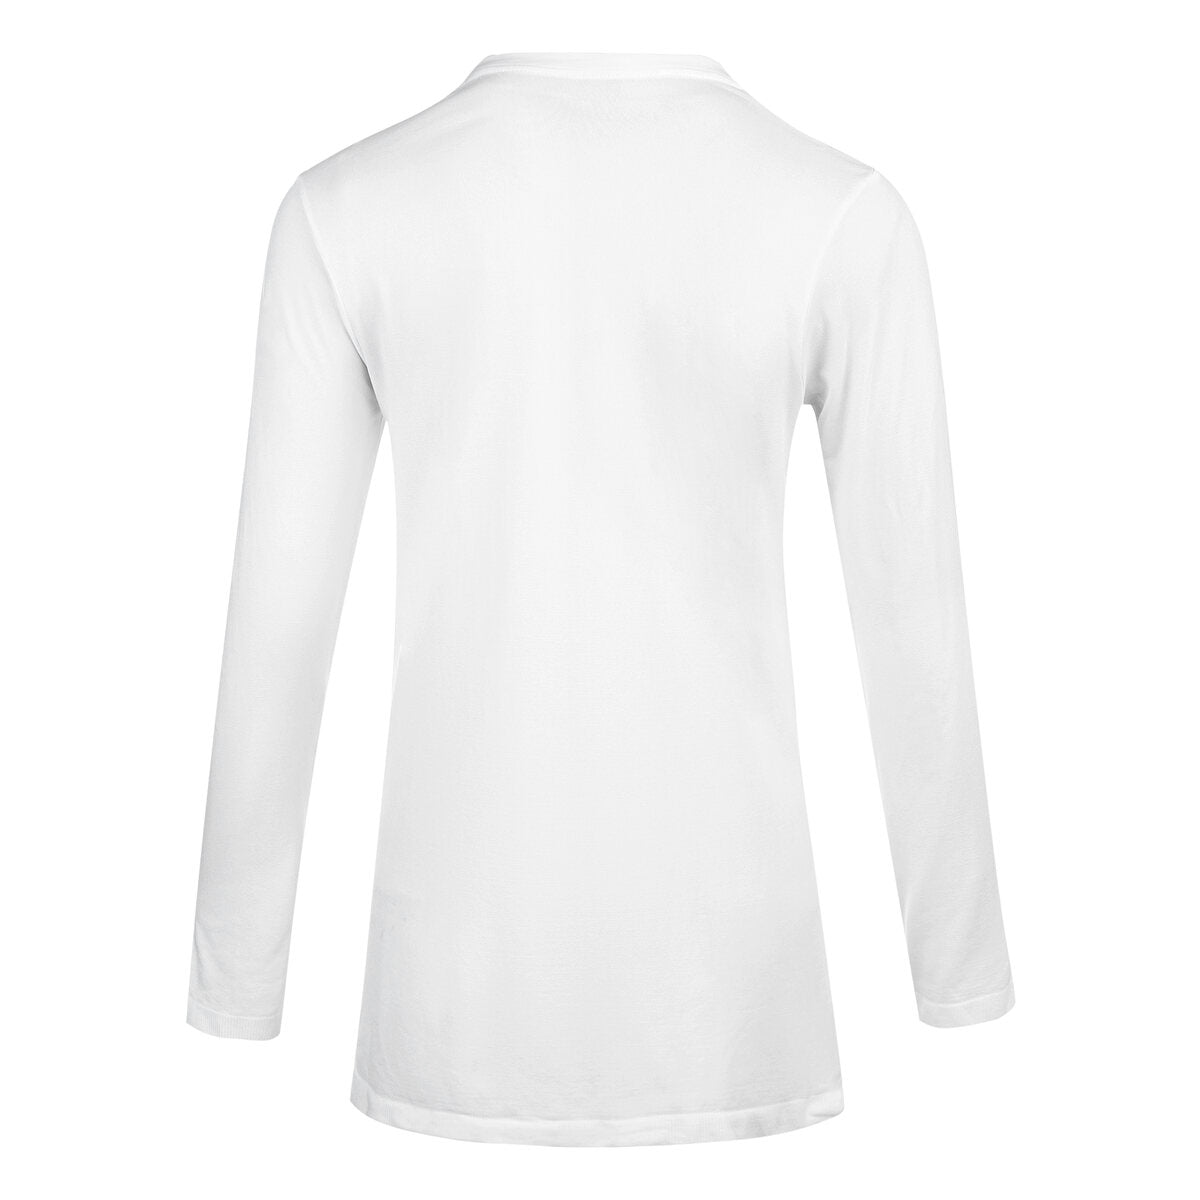 Athlecia Julee Womenswear Loose Fit Long Sleeve Seamless Tee - White 6 Shaws Department Stores